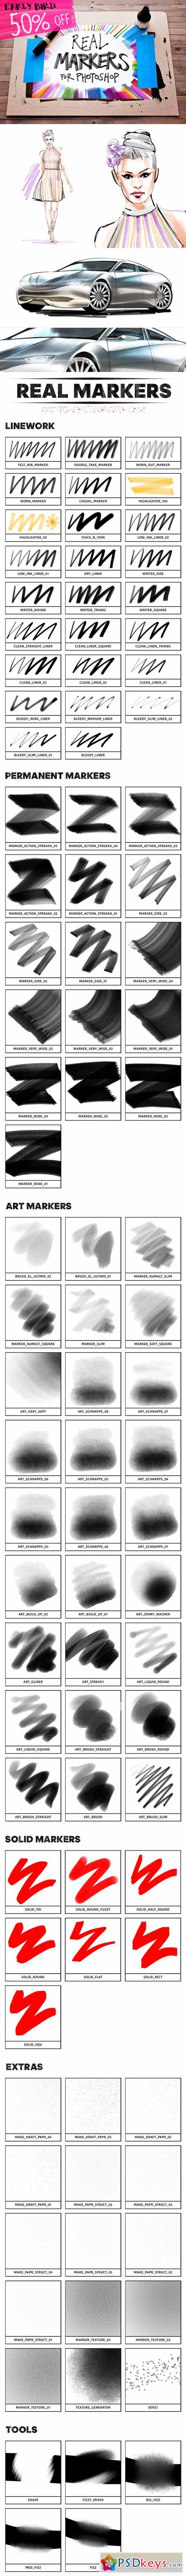 REAL MARKERS FOR PHOTOSHOP 339653